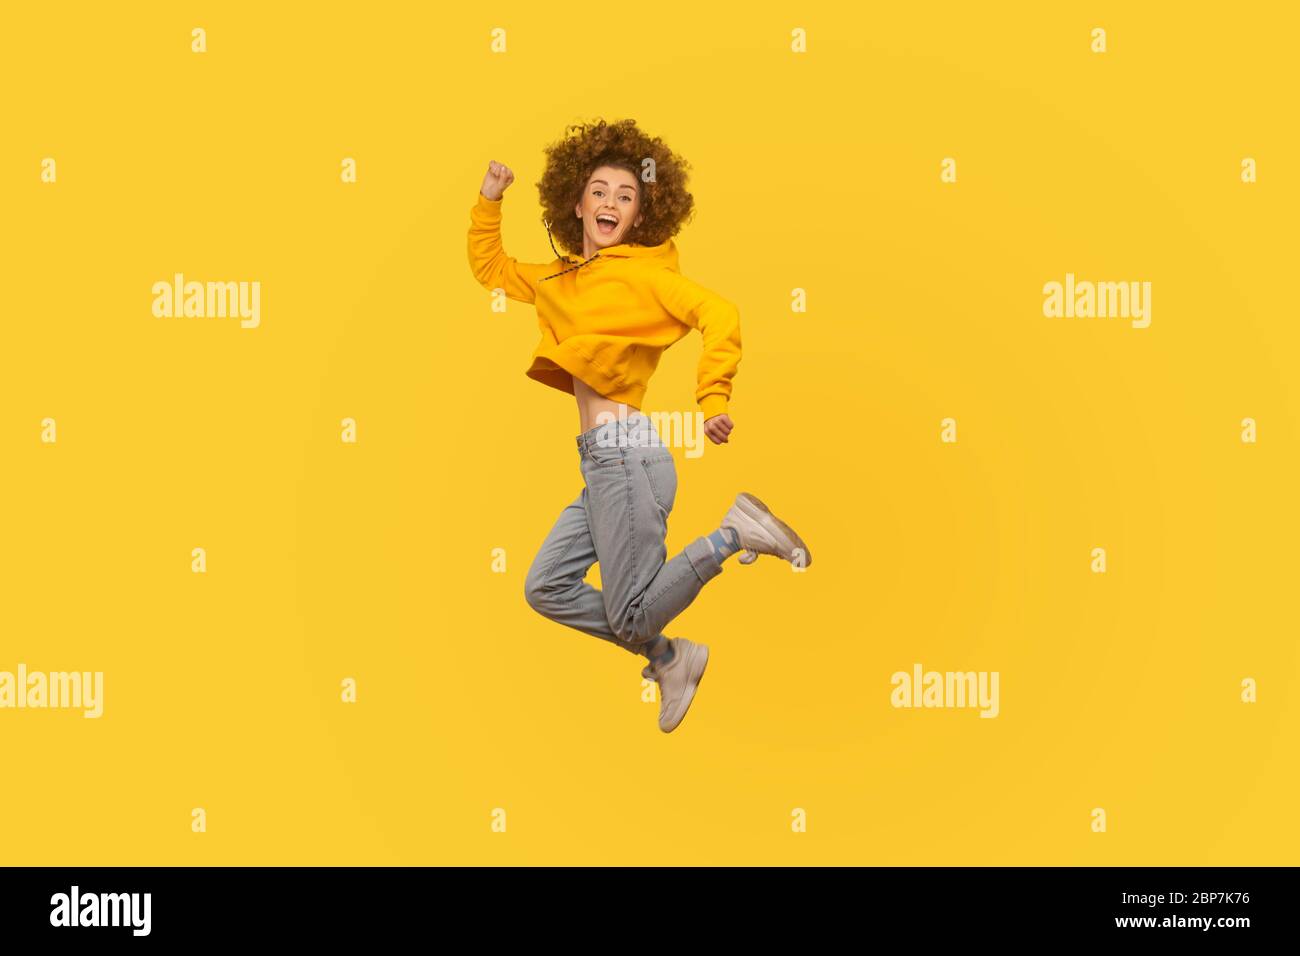 Portrait of enthusiastic joyful curly-haired girl in urban style hoodie and jeans jumping high in air, flying and shouting with amazed happy expressio Stock Photo